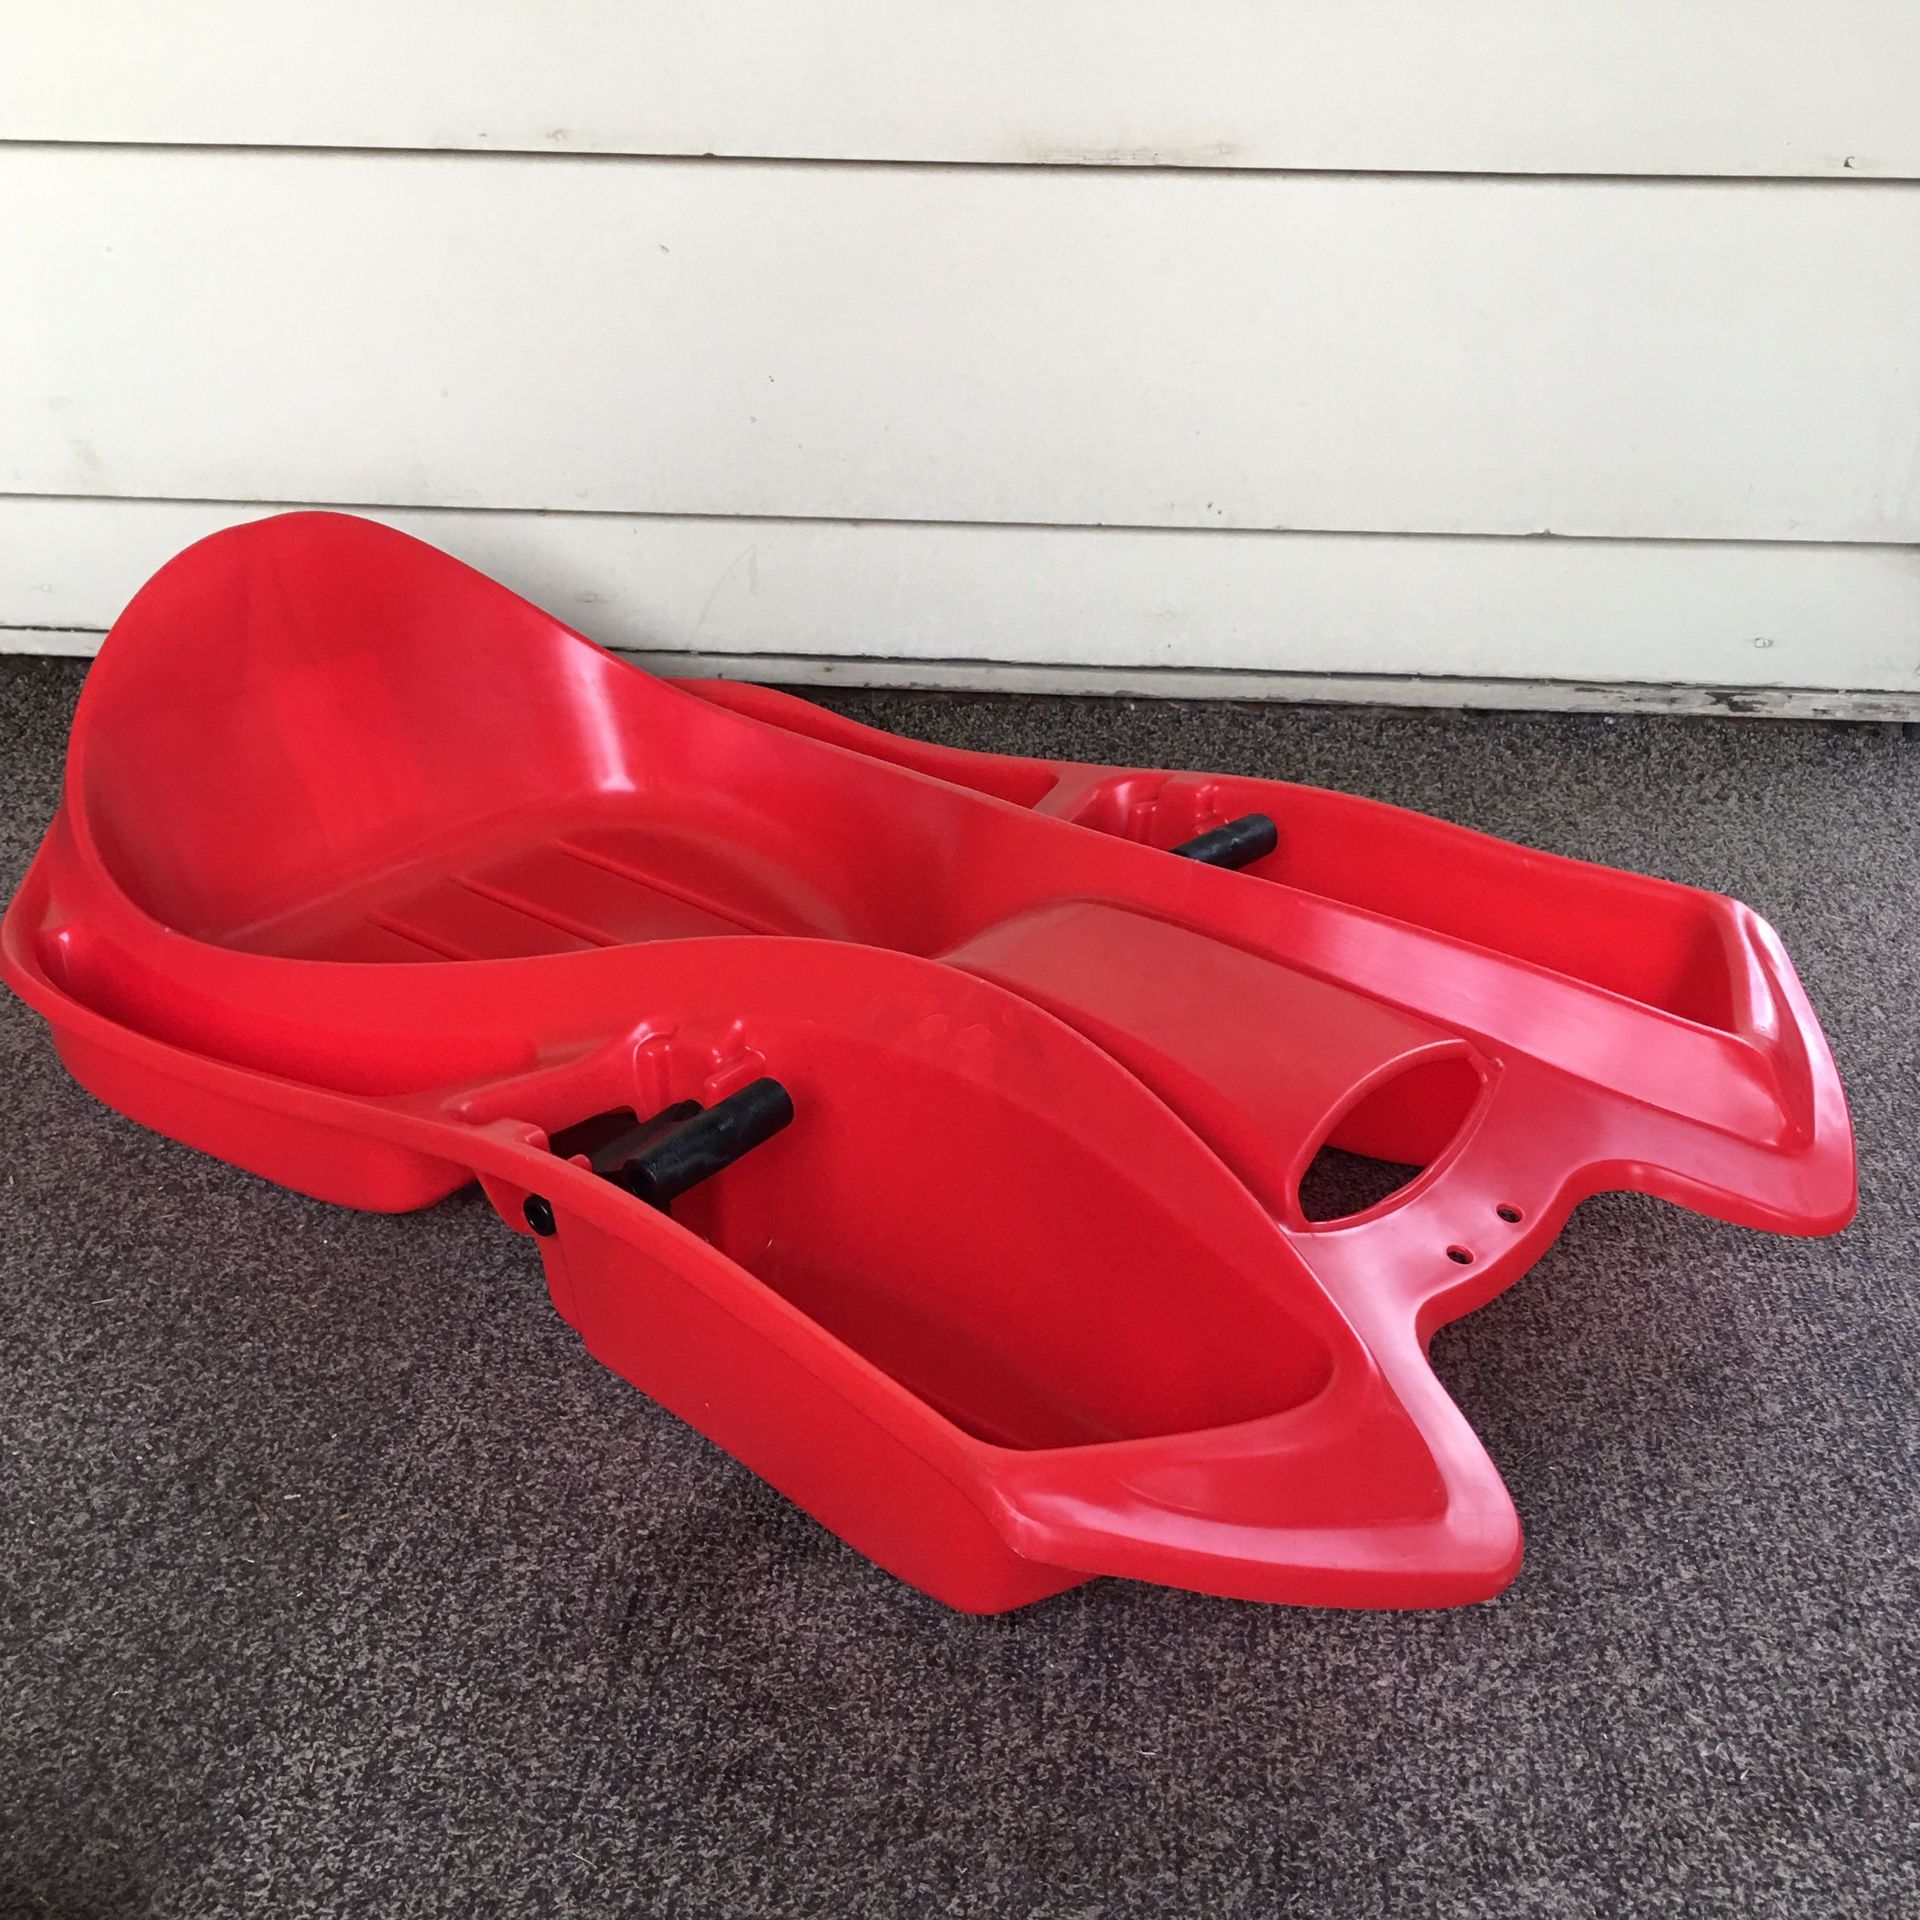 Youth red plastic sled by Paricon with molded back rest